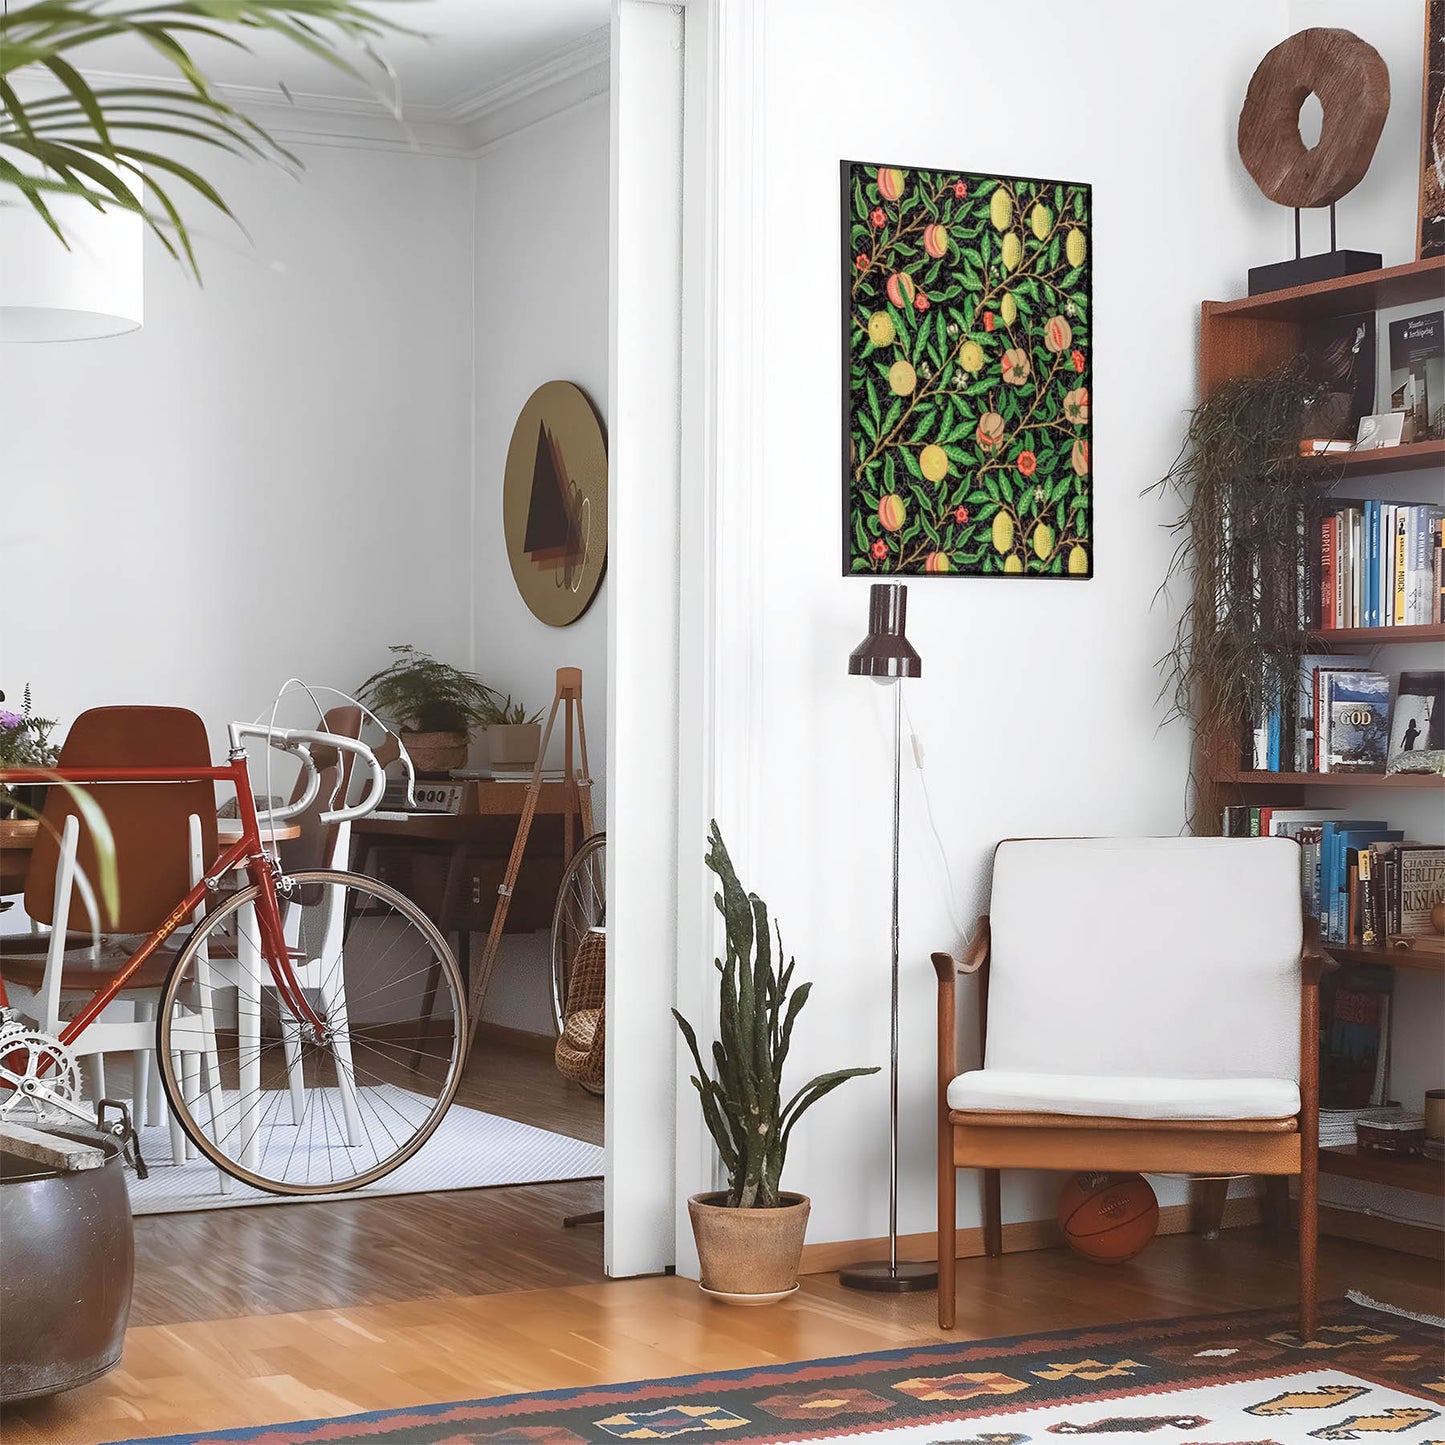 Eclectic living room with a road bike, bookshelf and house plants that features framed artwork of a Plants and Citrus above a chair and lamp